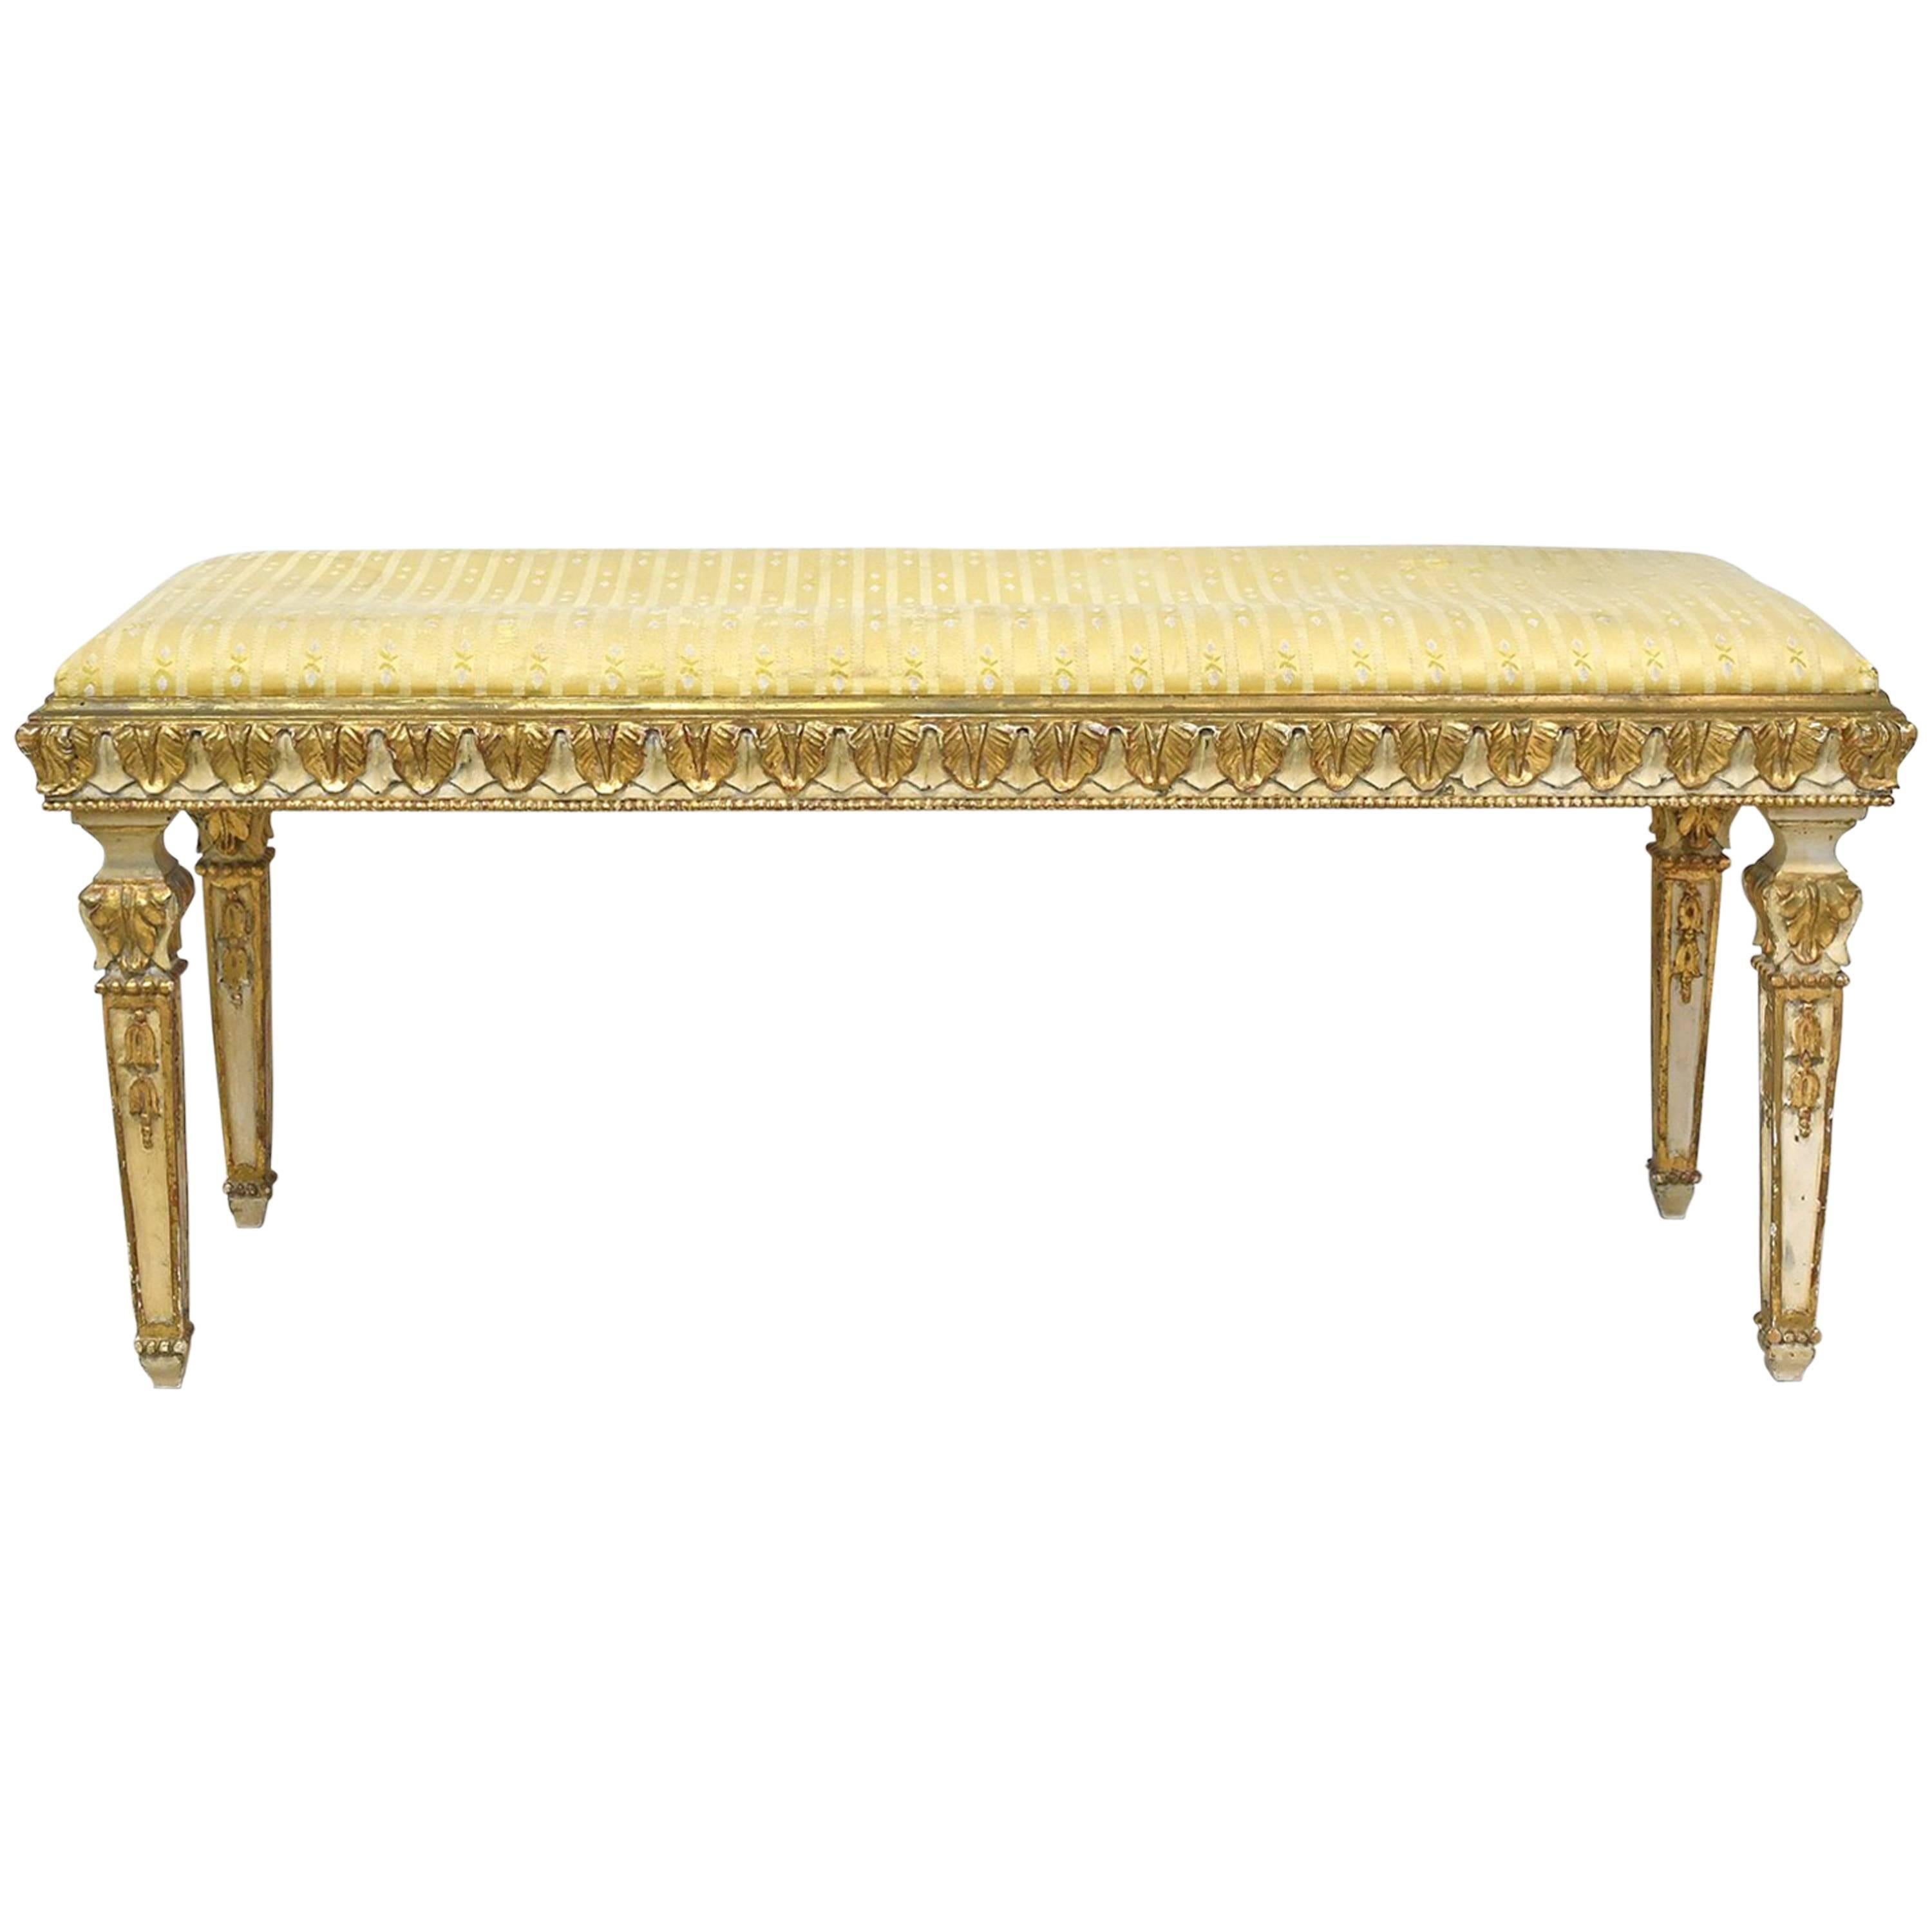 Belle Époque Bench in Gilded & Polychrome Wood with Upholstered Seat